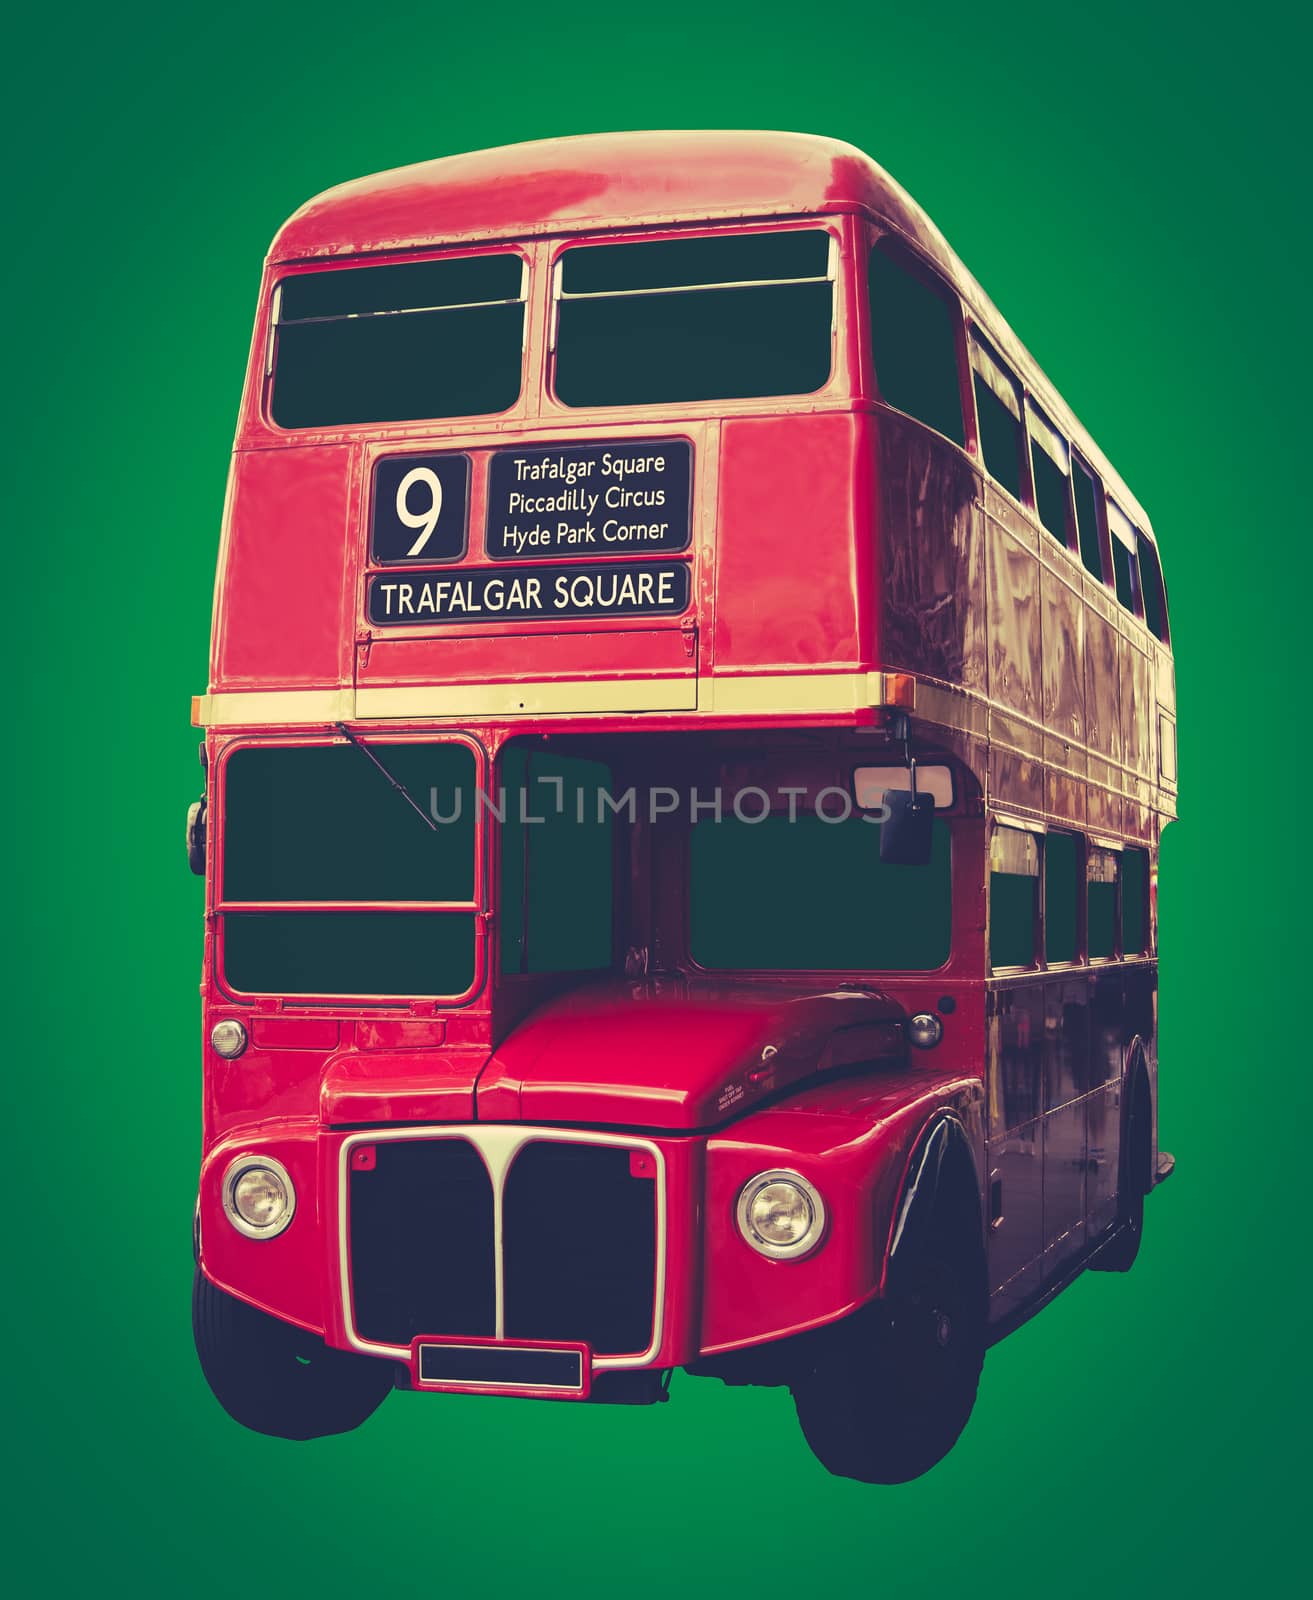 Iconic Red London Bus by mrdoomits